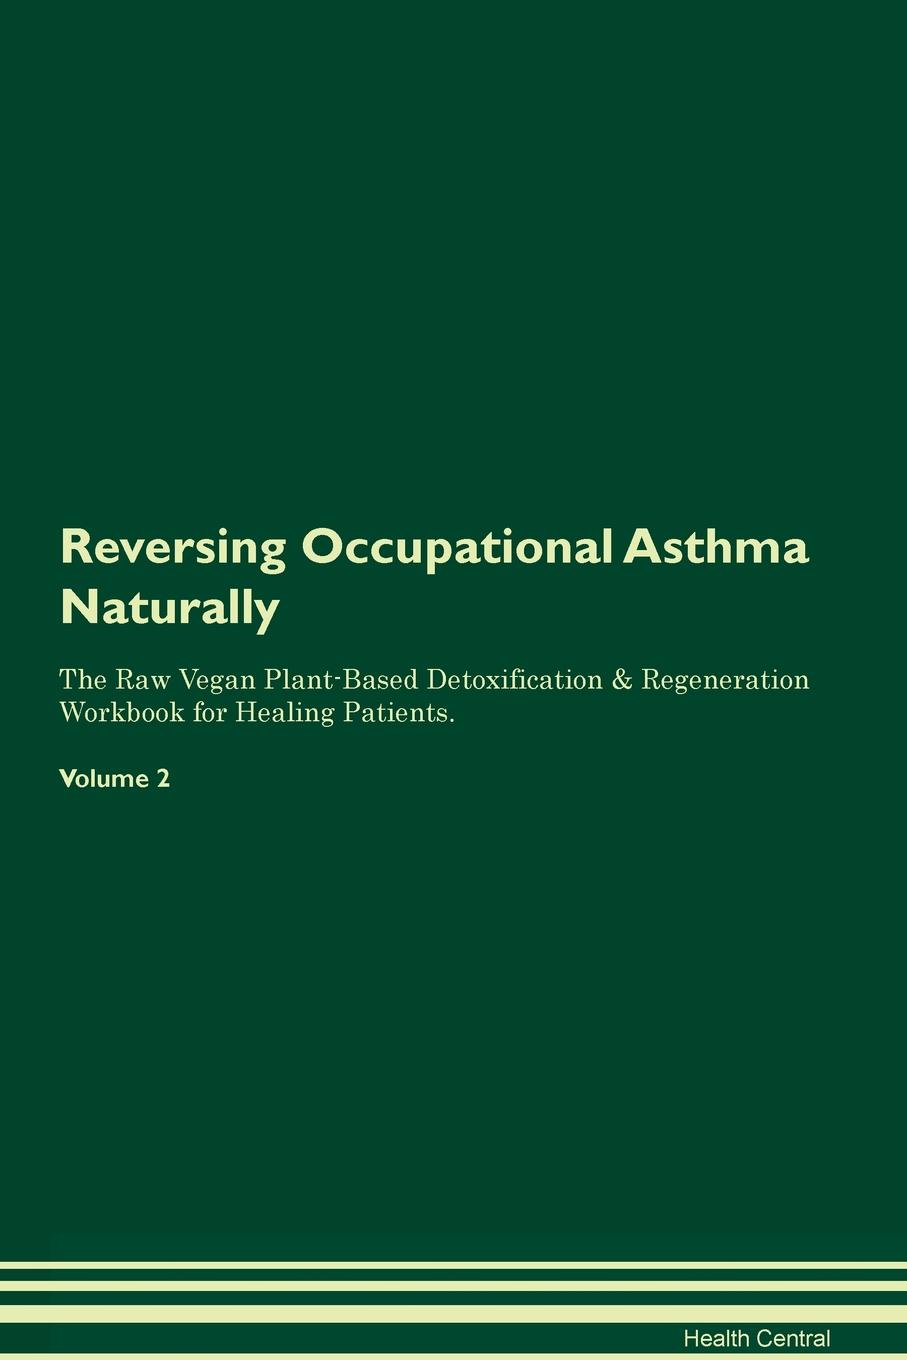 Reversing Occupational Asthma Naturally The Raw Vegan Plant-Based Detoxification & Regeneration Workbook for Healing Patients. Volume 2